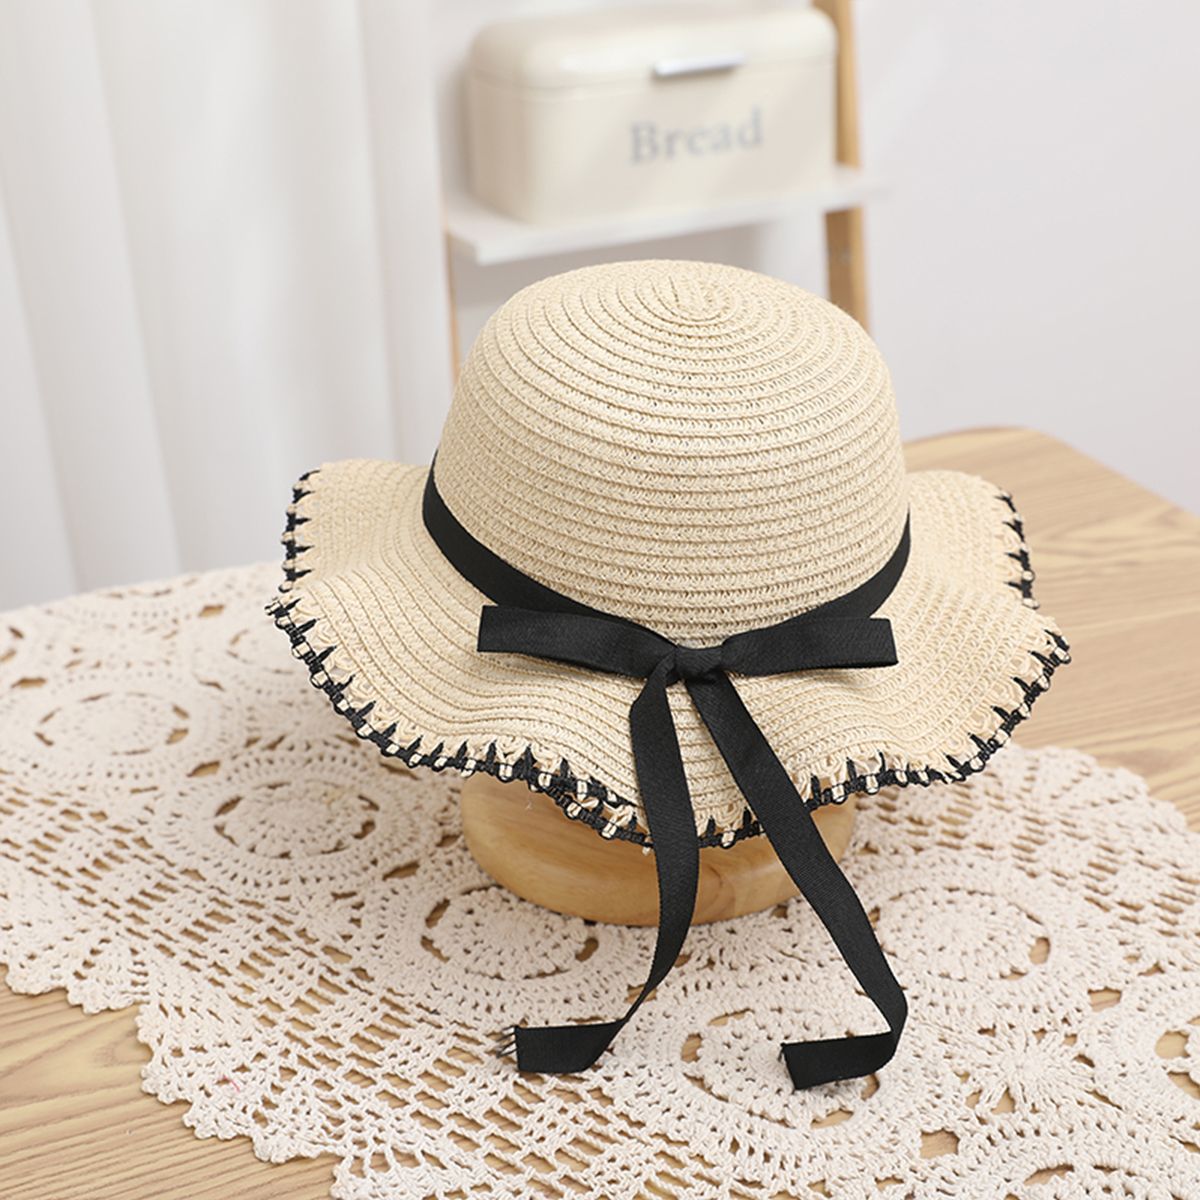 Woven Edging Straw Hat with Bow for Mommy and Me